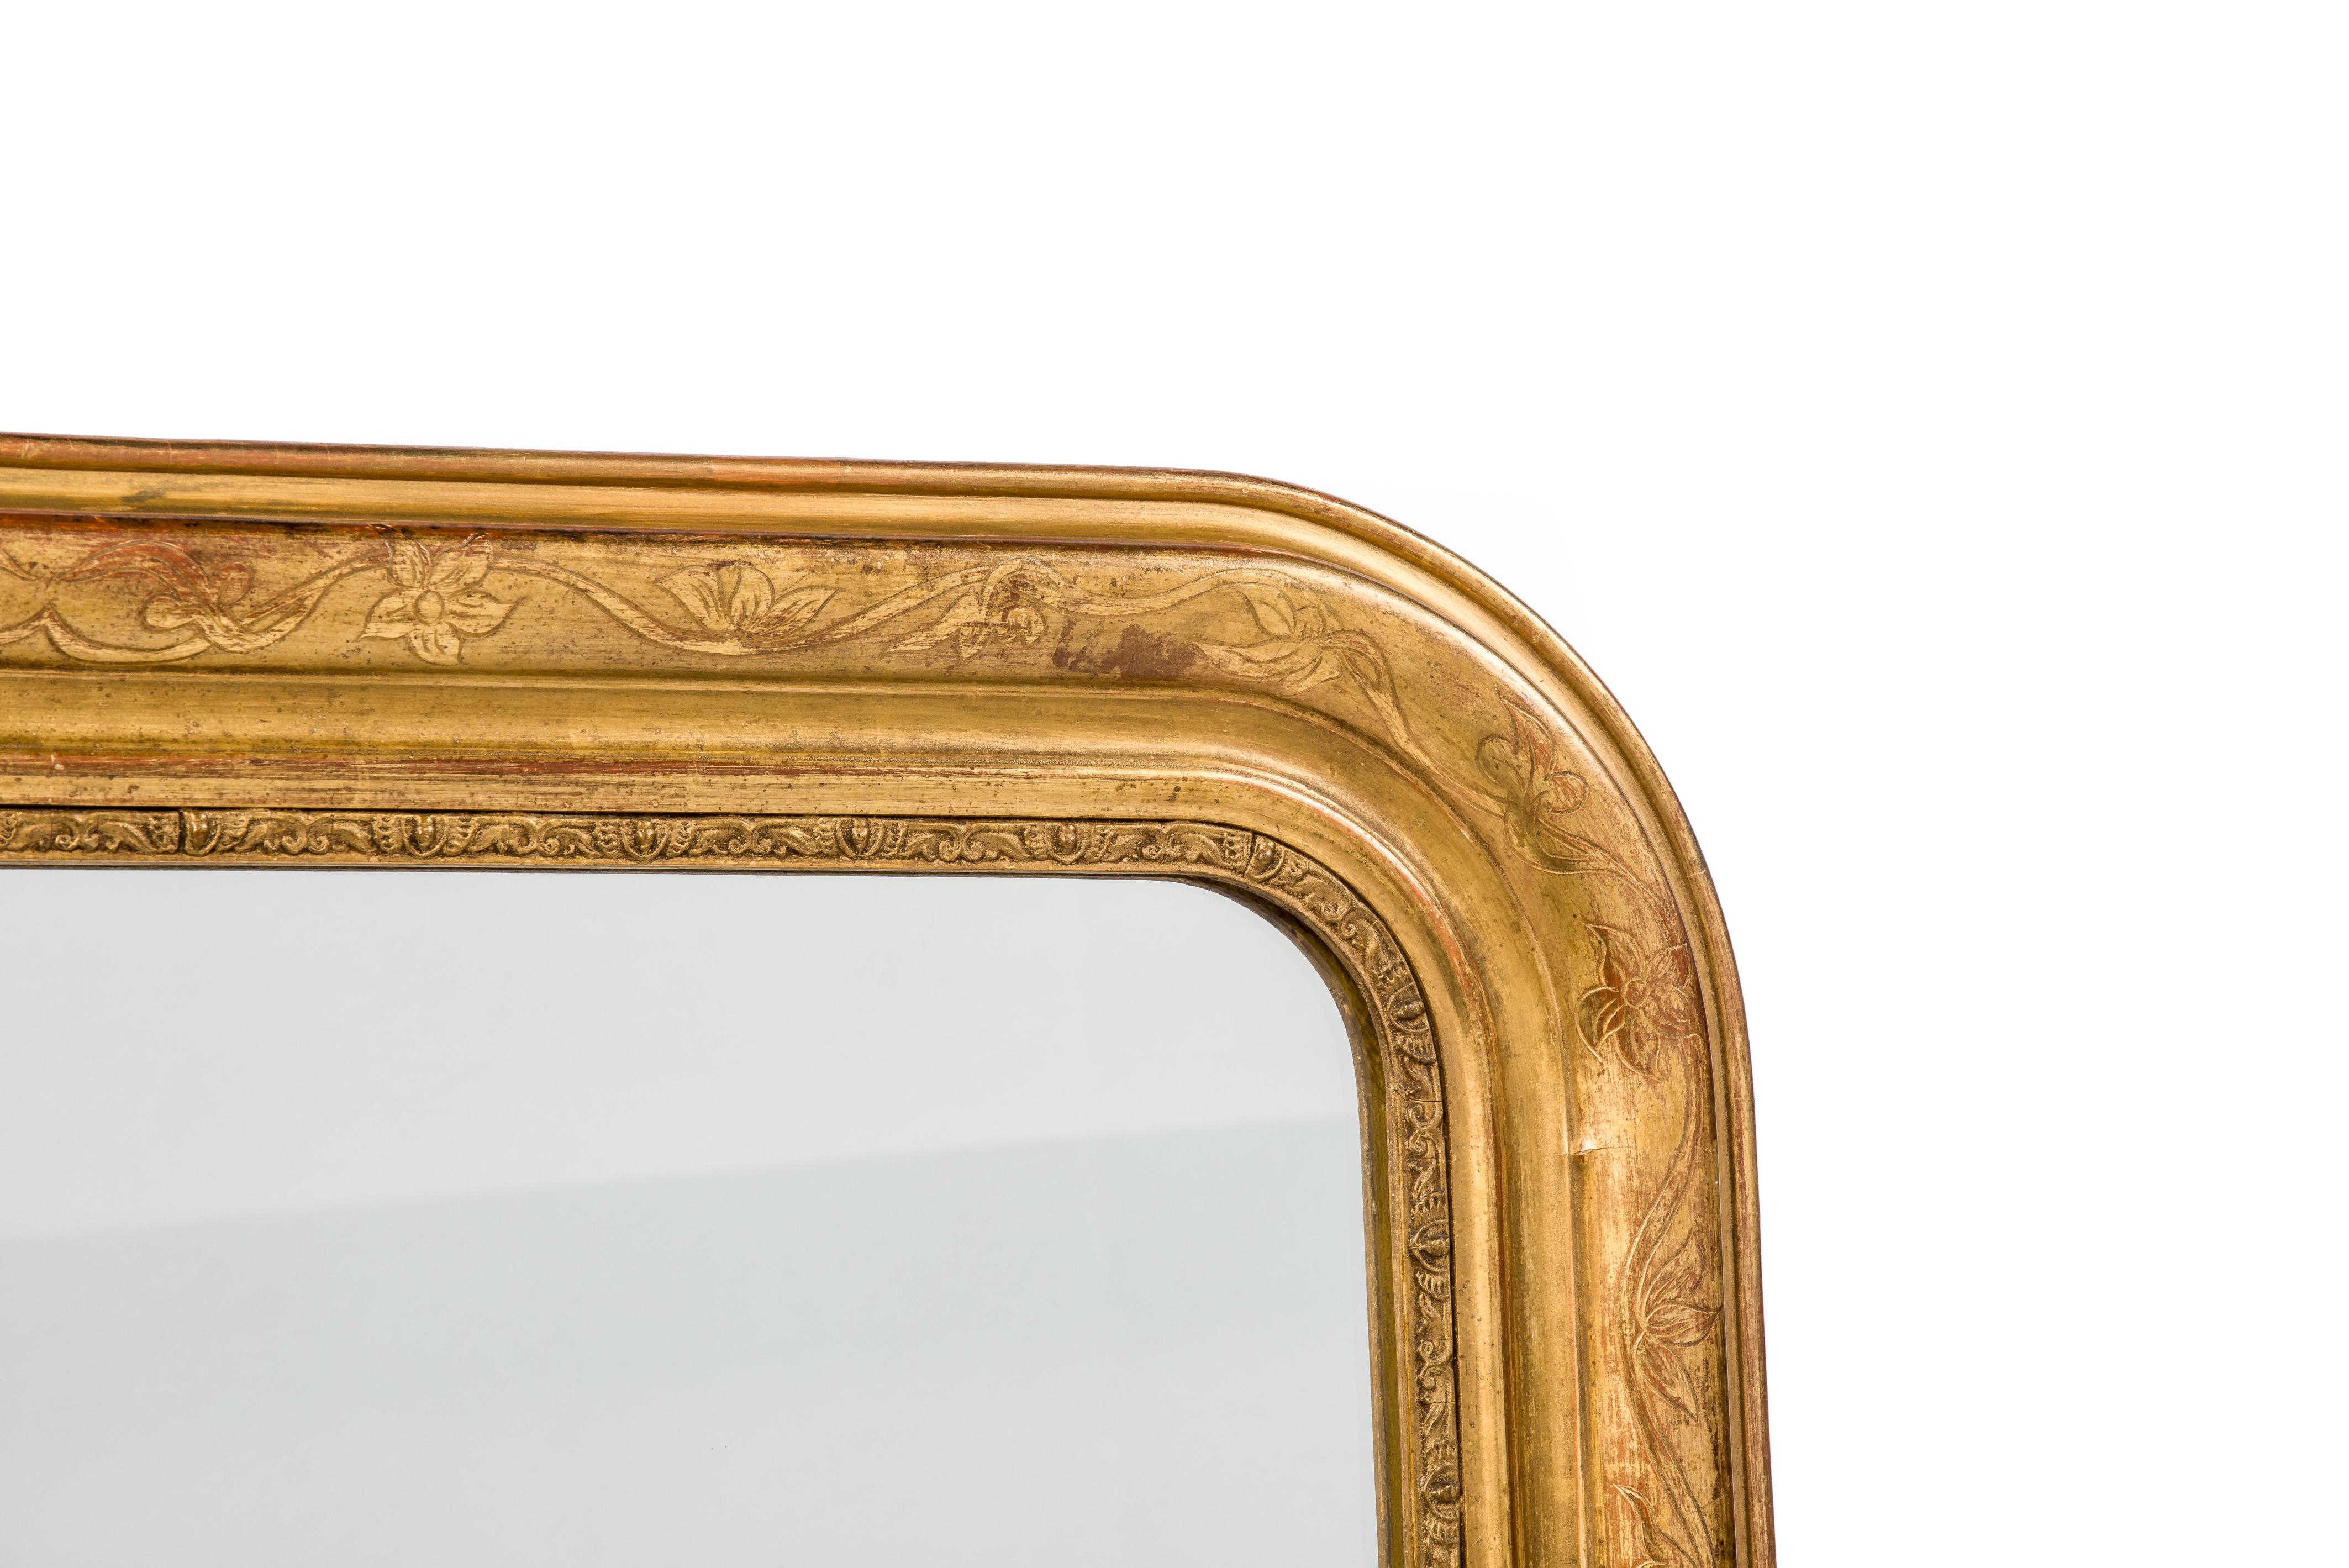 This is a beautiful partially gold leaf gilt and partially gold painted Louis Philippe mirror that was made in France at the end of the 19th century. It features the upper rounded corners typical for French Louis Philippe mirrors. The frame is